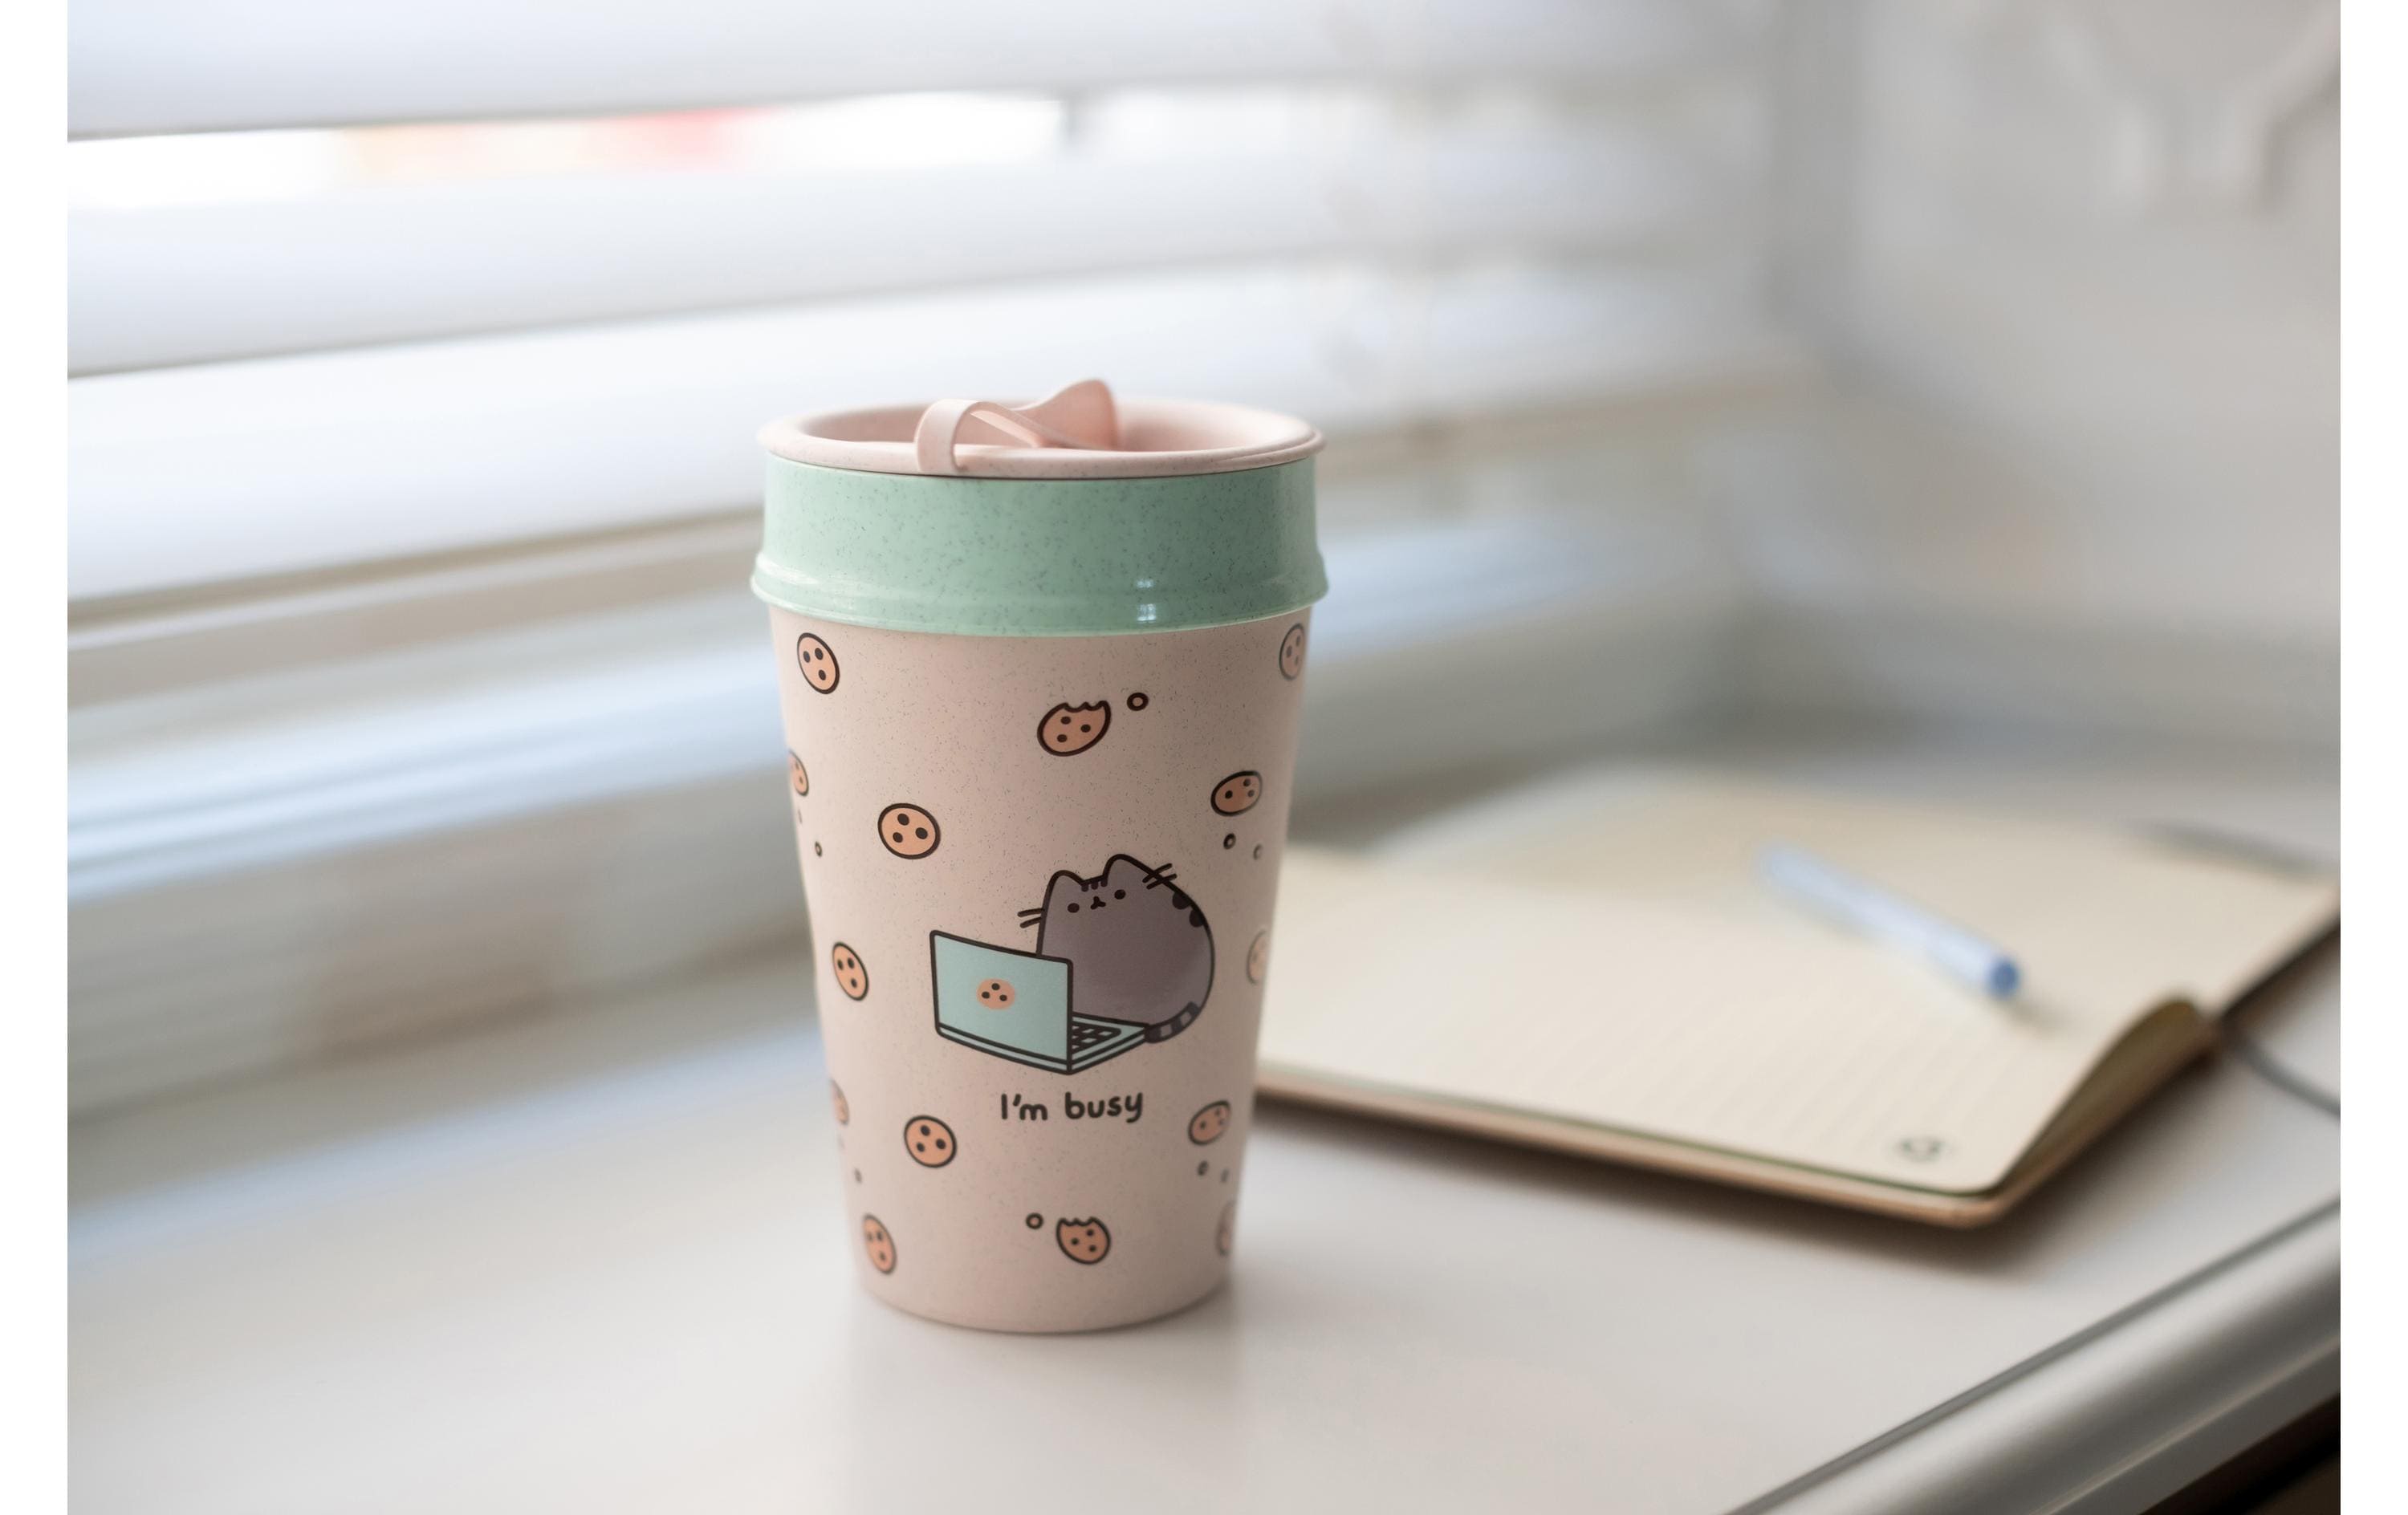 Koziol Thermobecher Iso to Go Pusheen 400 ml, Rosa/Hellpink